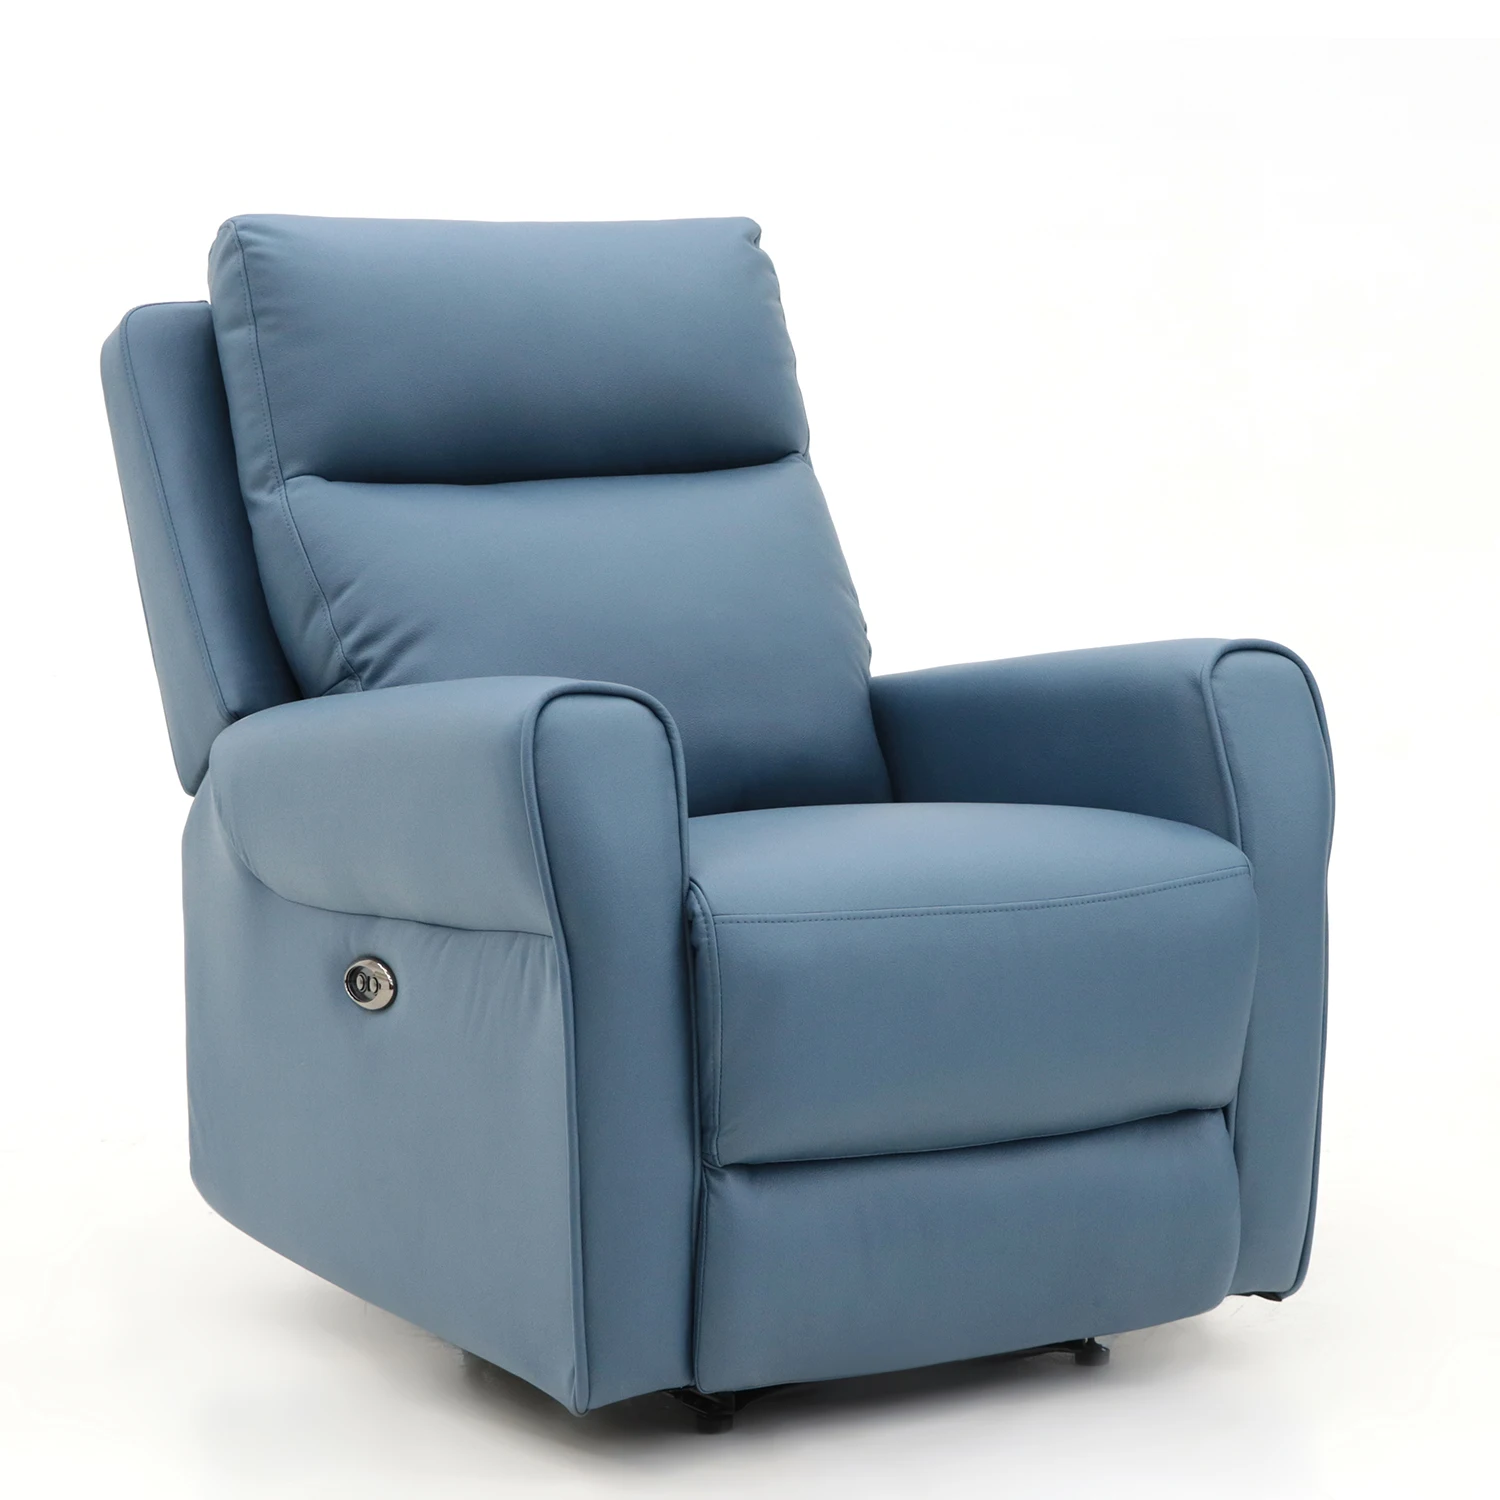 

JKY Furniture China New Design Comfortable Automatic Adjustable Electronic Electric Power Recliner Chair Sofa